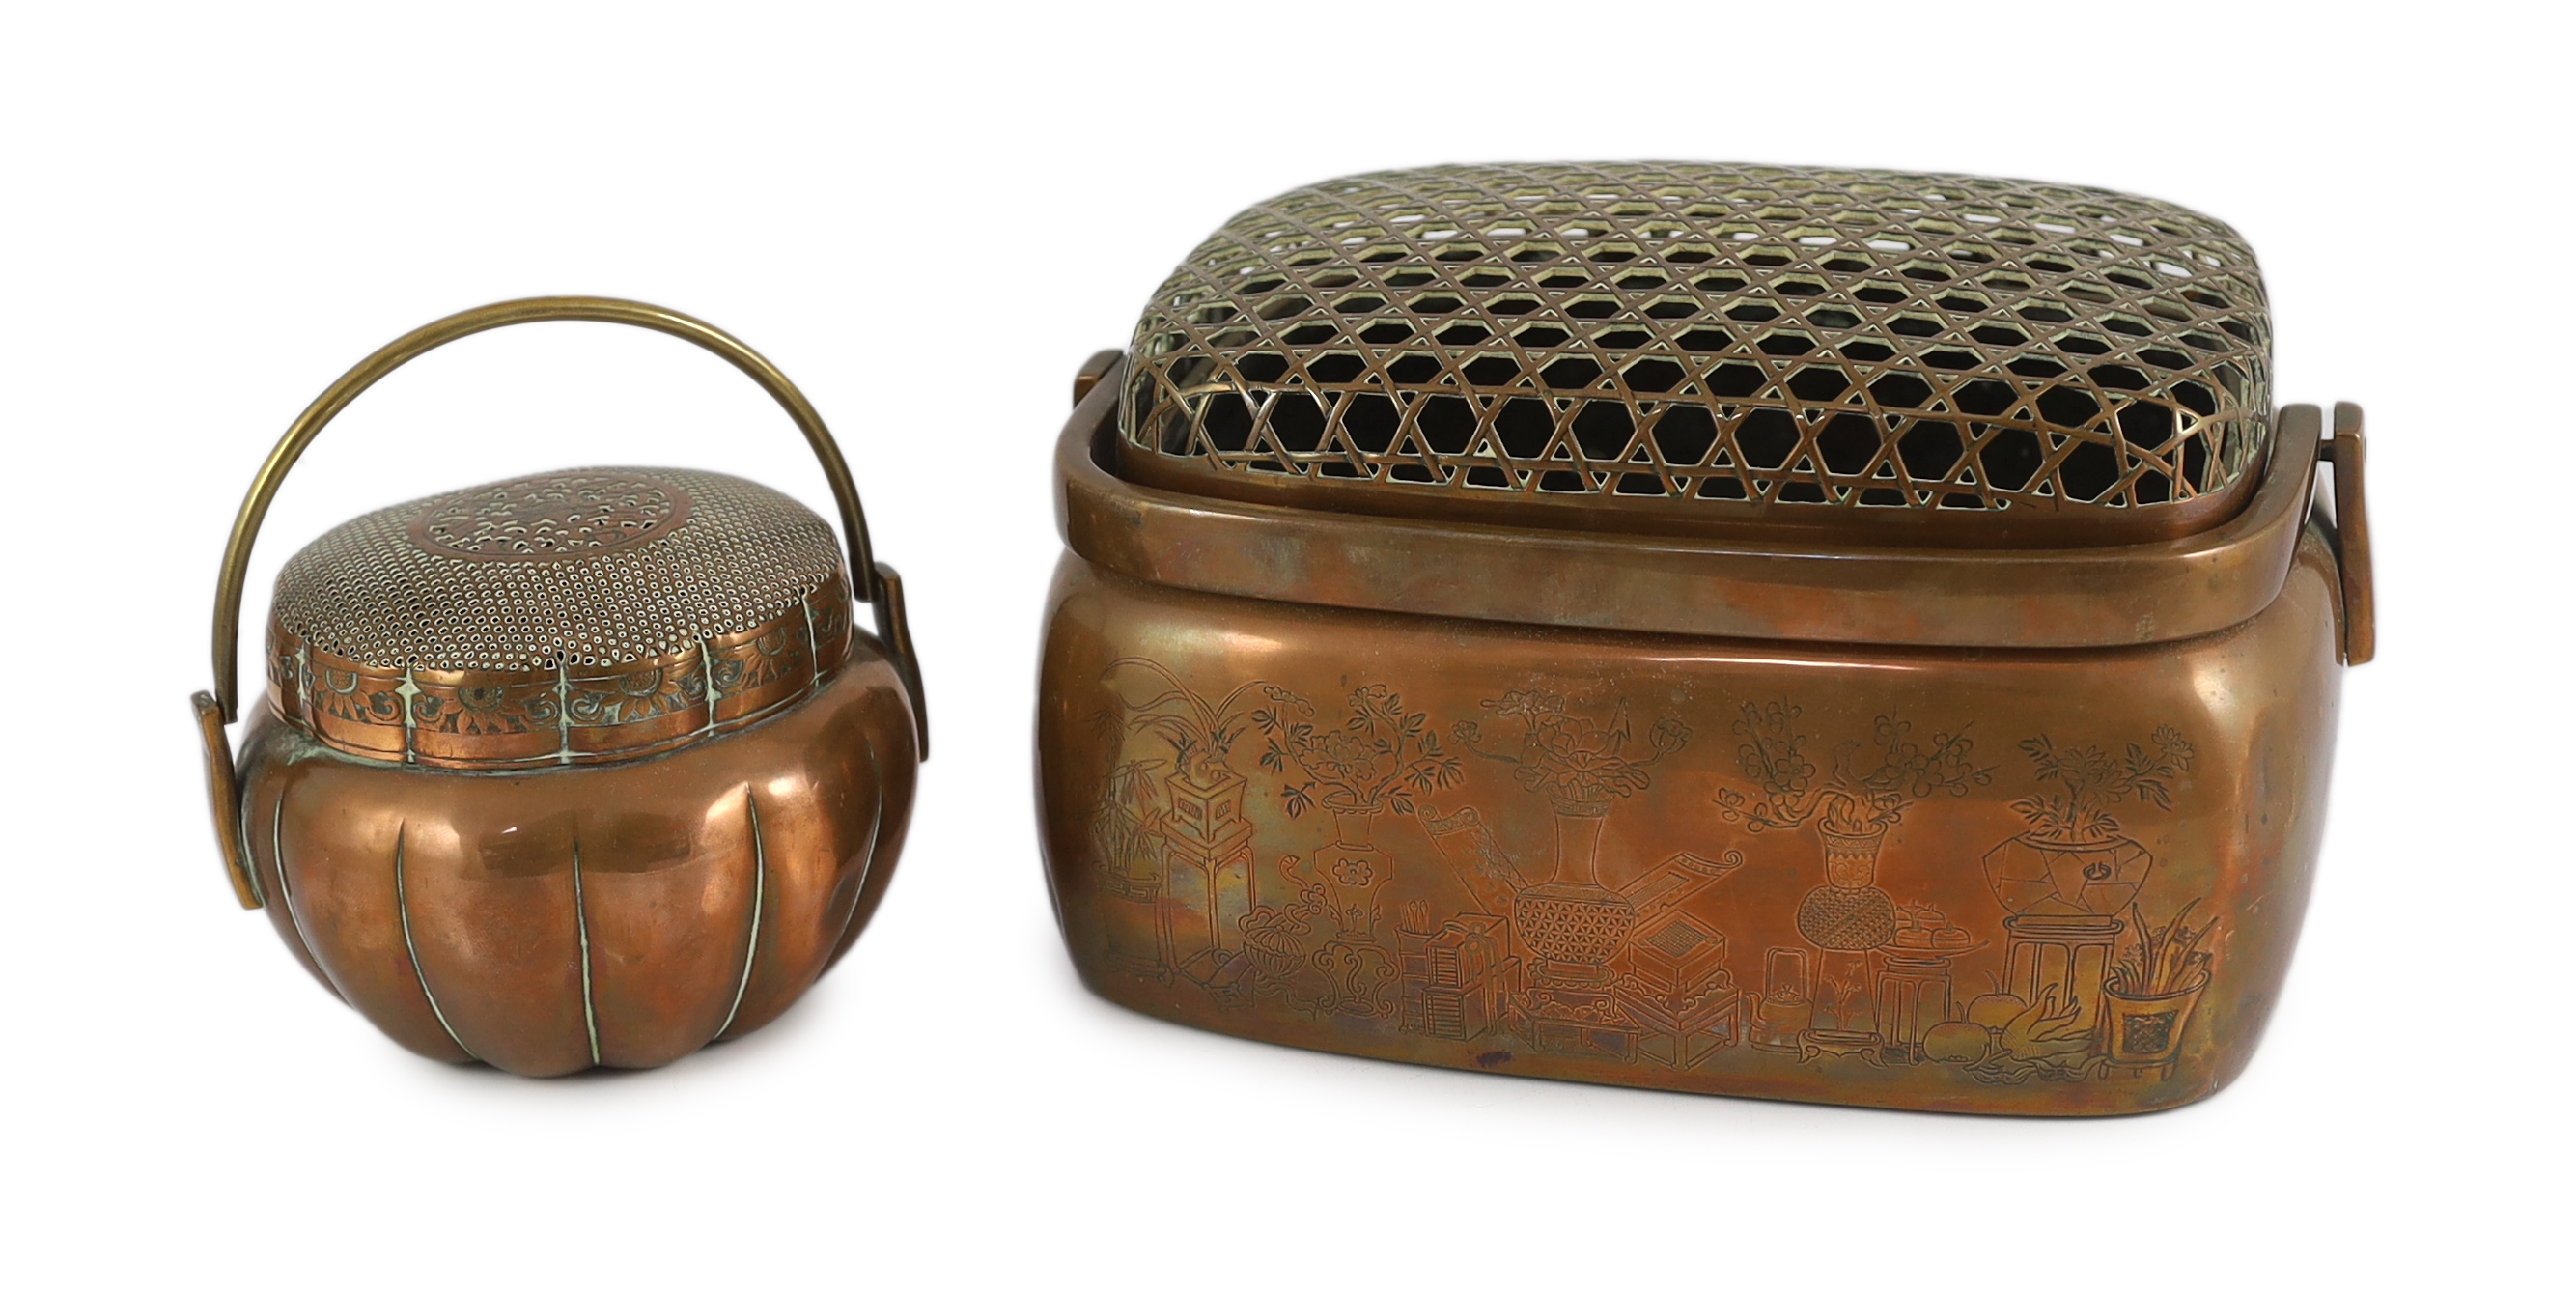 Two Chinese copper hand warmers, the largest signed ‘Zhang Mingqi', 18th/19th century                                                                                                                                       